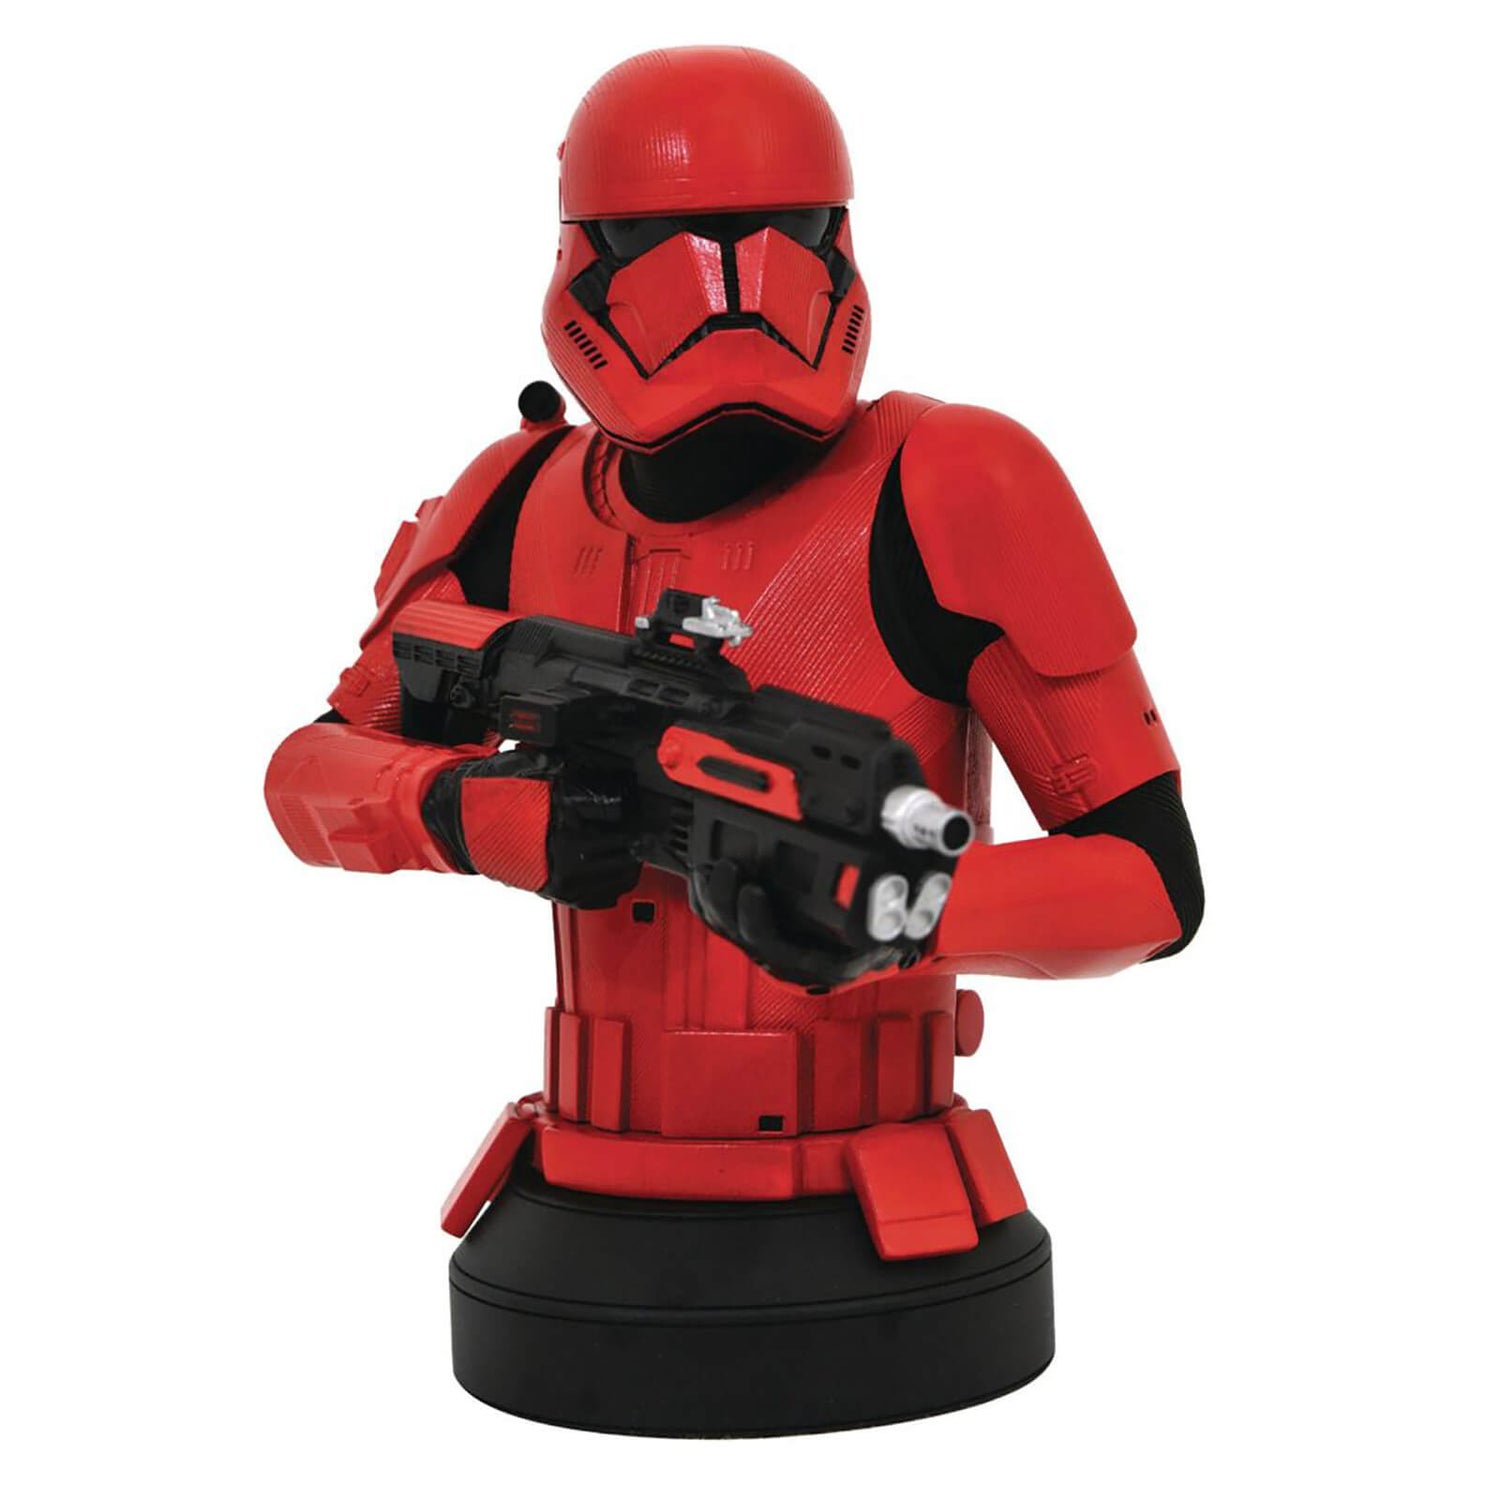 Gentle Giant Star Wars: The Rise Of Skywalker Sith Trooper 1/6 Scale Bust